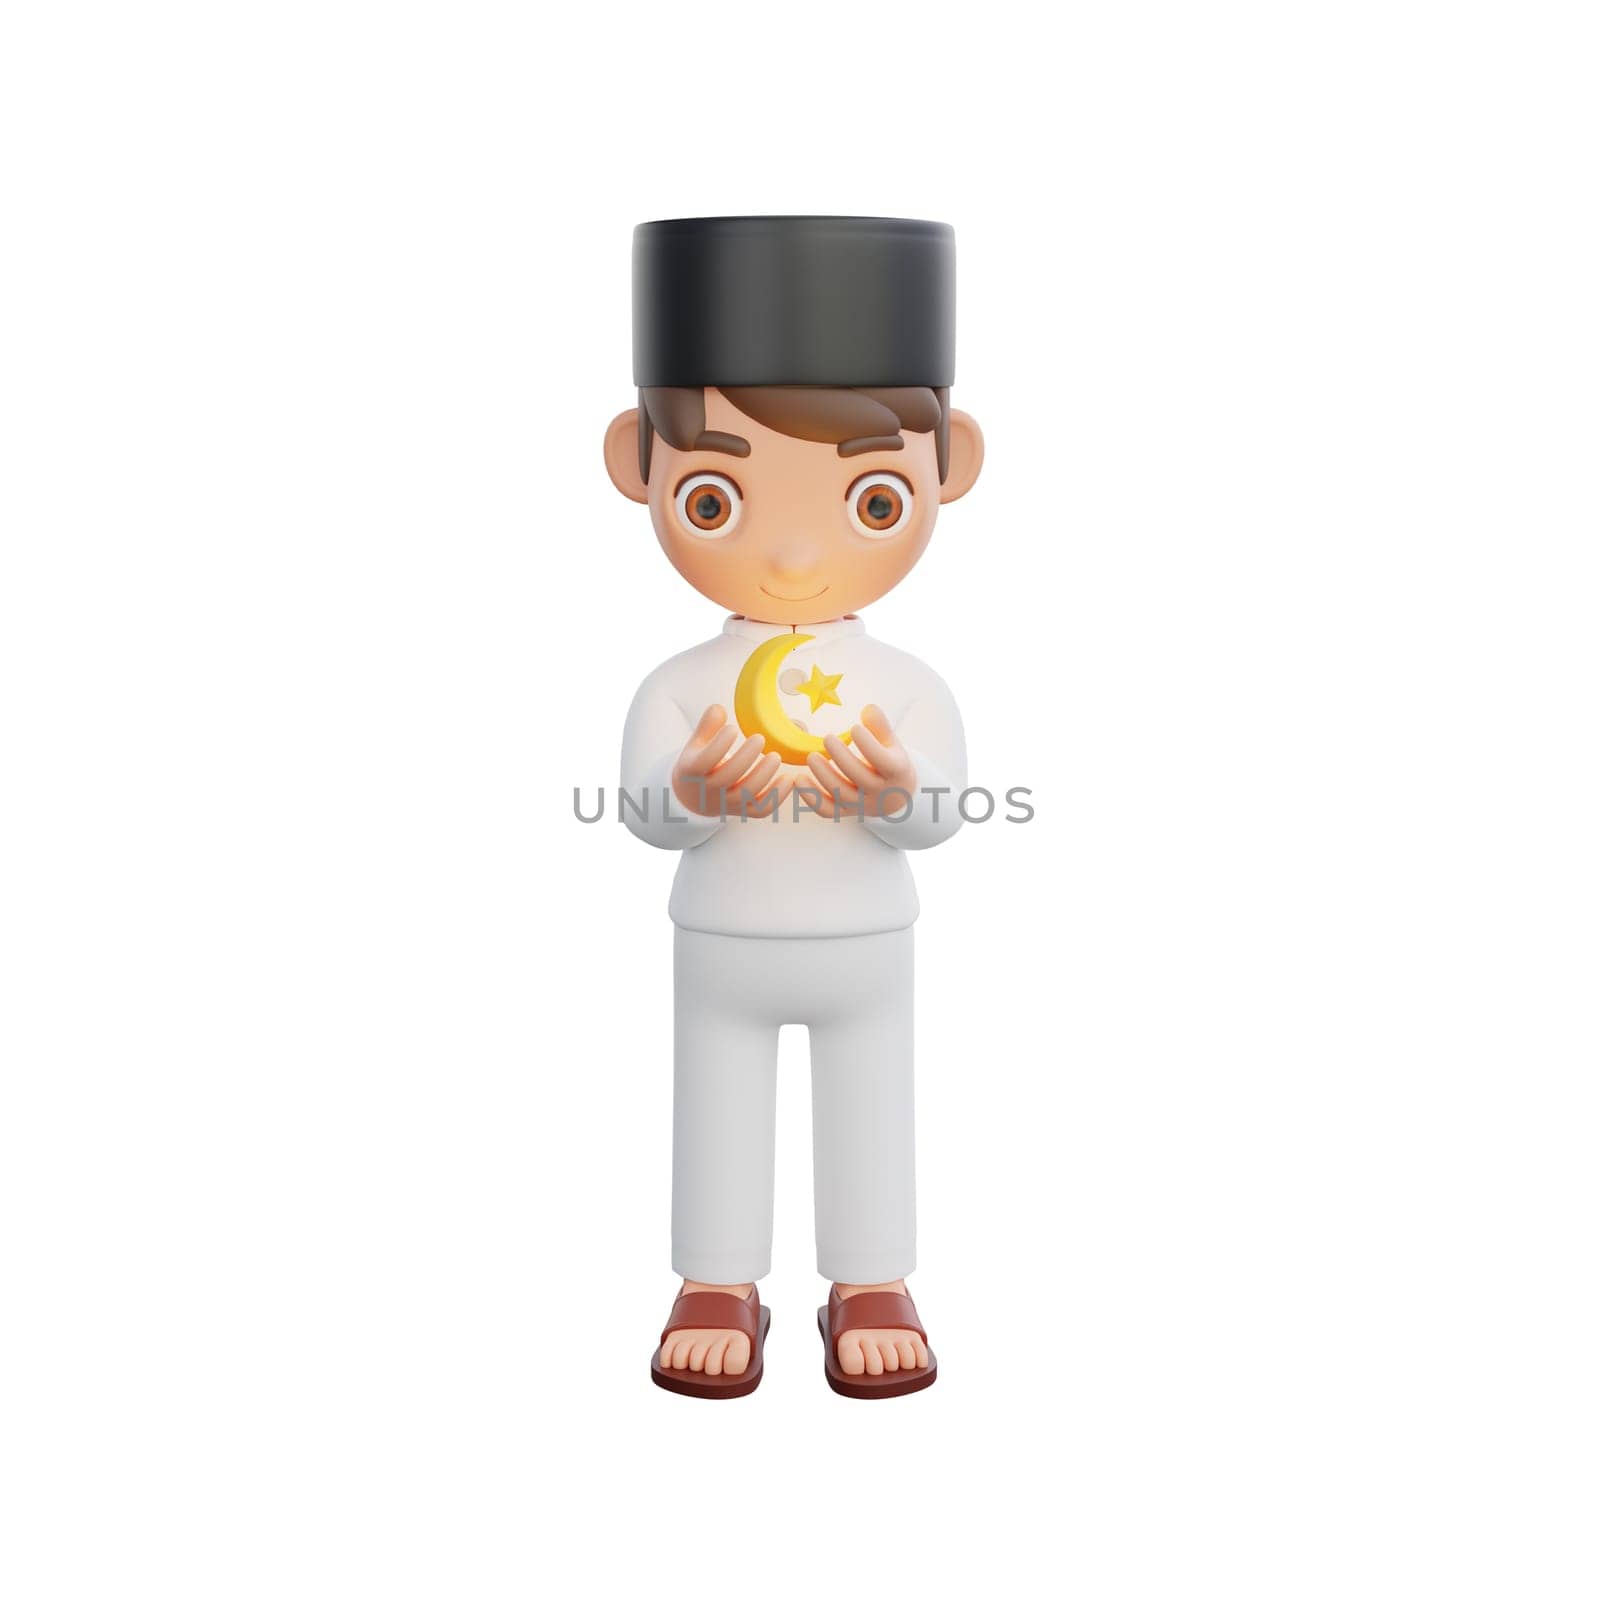 3D Illustration of Muslim character holding a glowing crescent moon and star by Rahmat_Djayusman